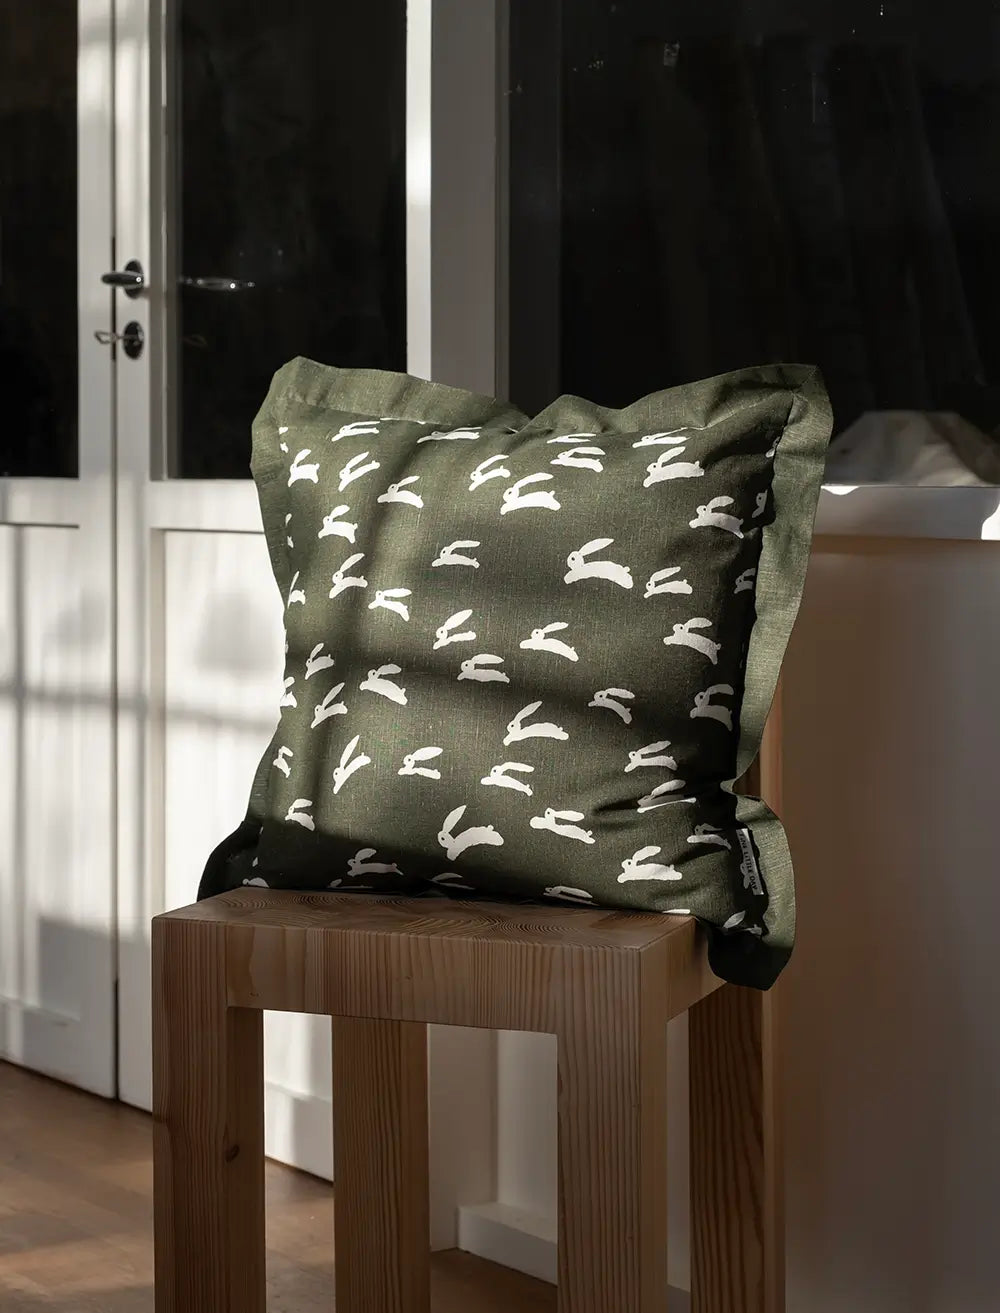 On a wooden chair sits a square moss green cushion with playful white rabbit print by Fine Little Day